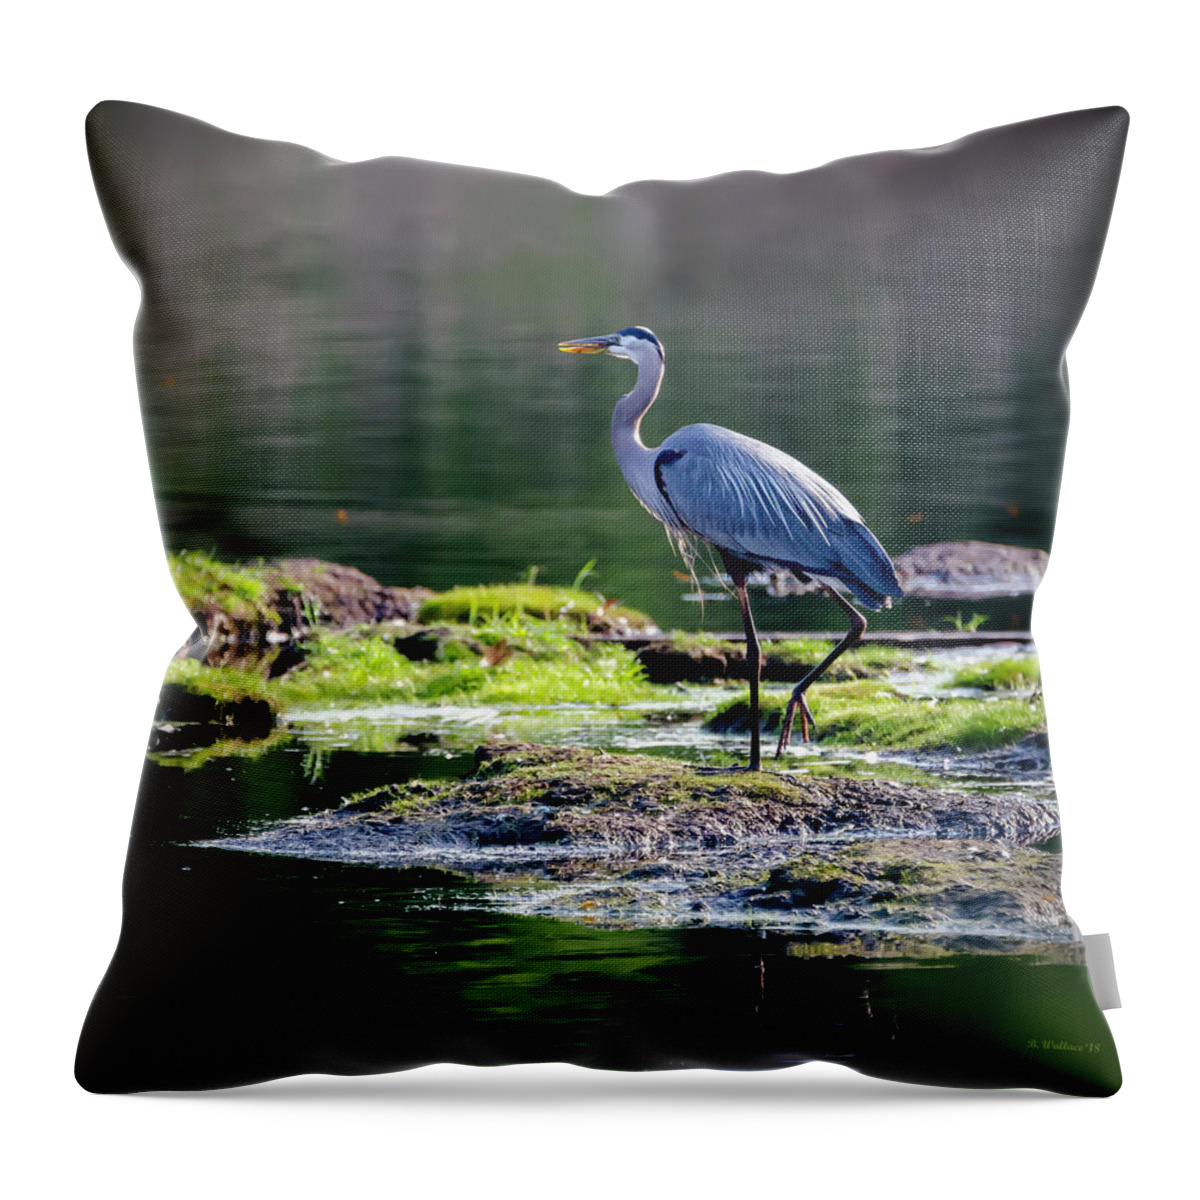 2d Throw Pillow featuring the photograph Great Blue Heron In Pond by Brian Wallace